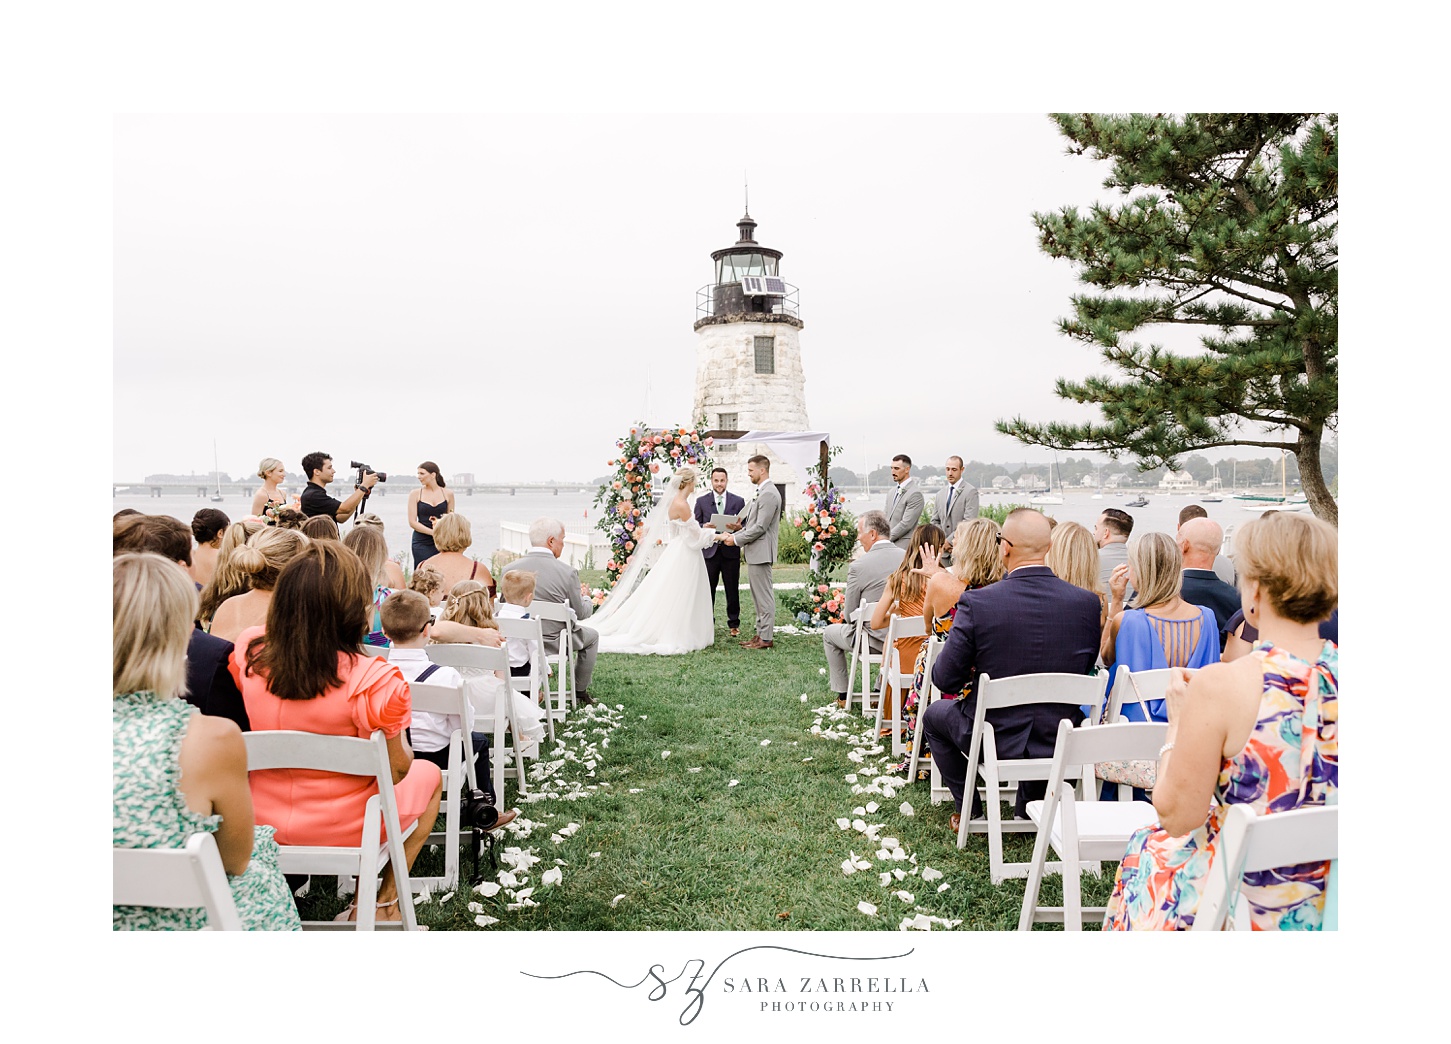 wedding ceremony on lawn in front of Newport Lighthouse 